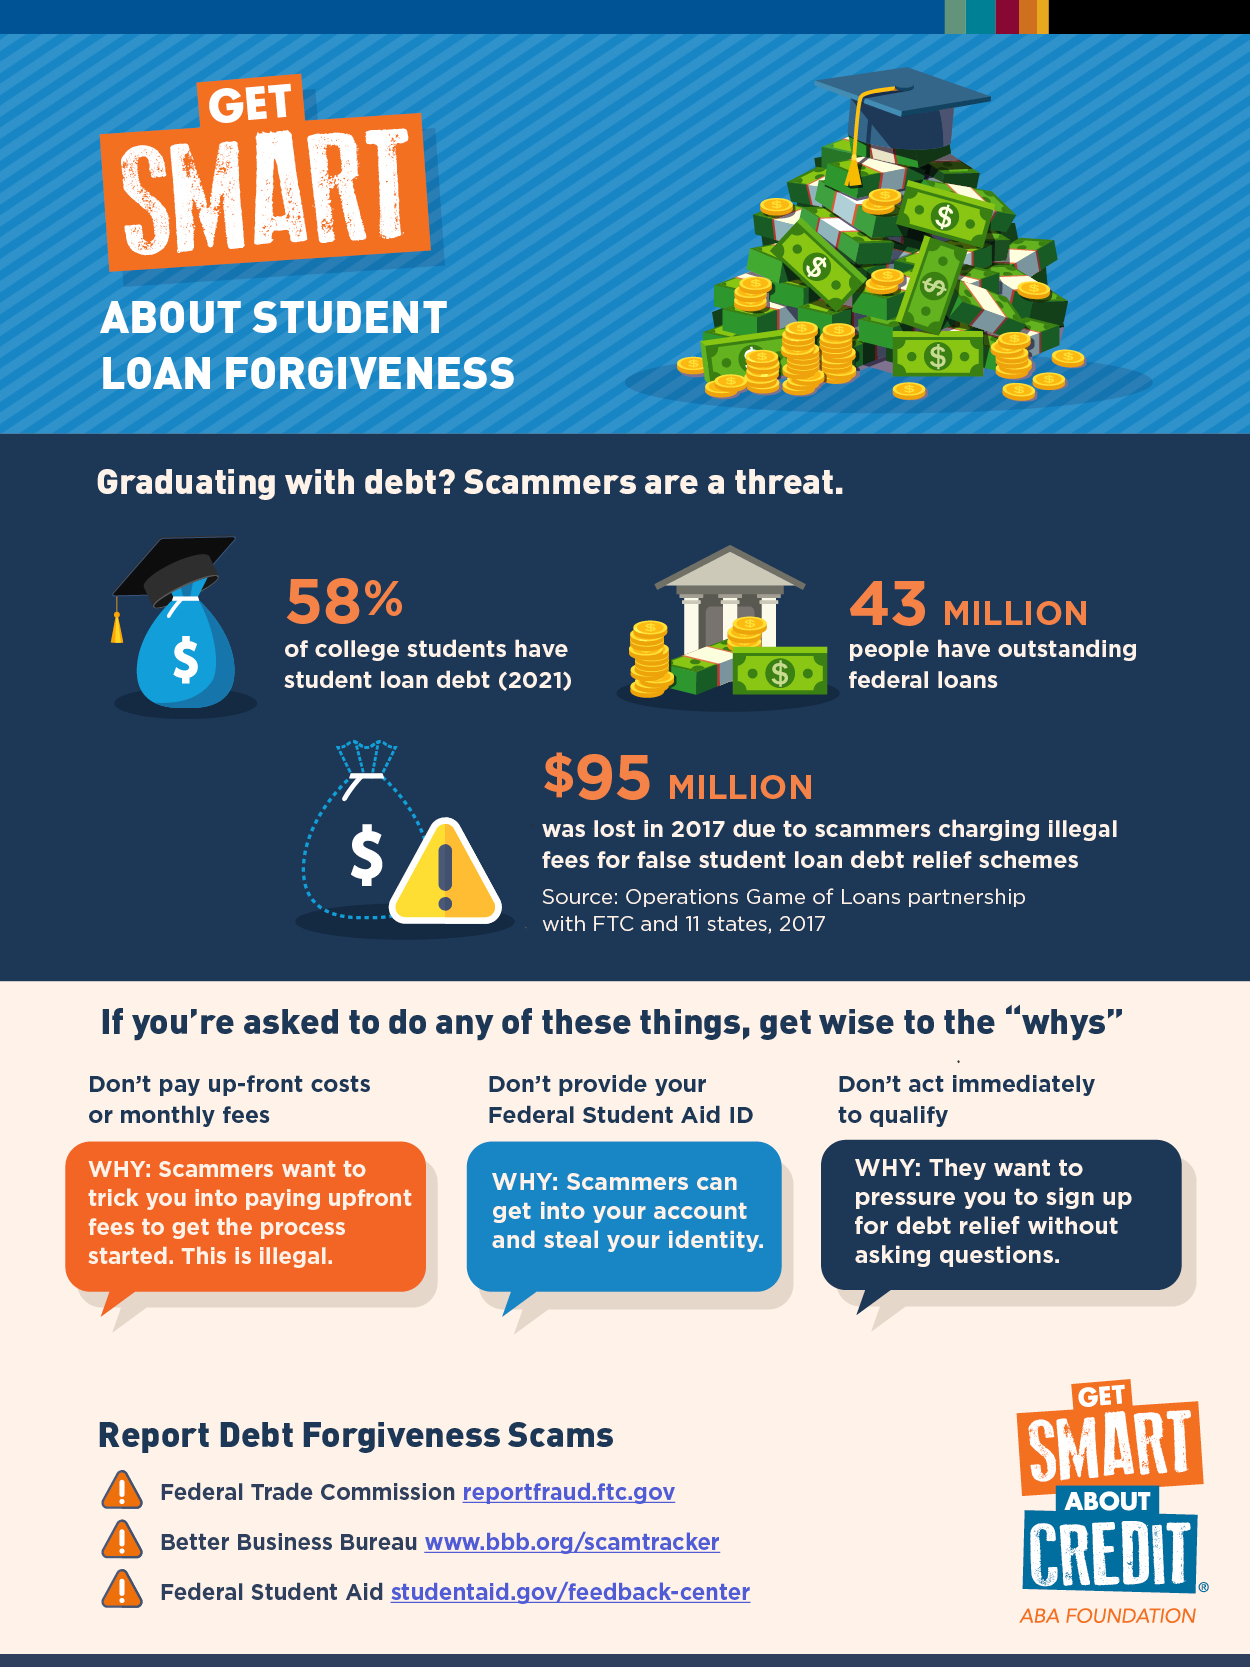 Get smart about student loan forgiveness by knowing about debt forgiveness scams.